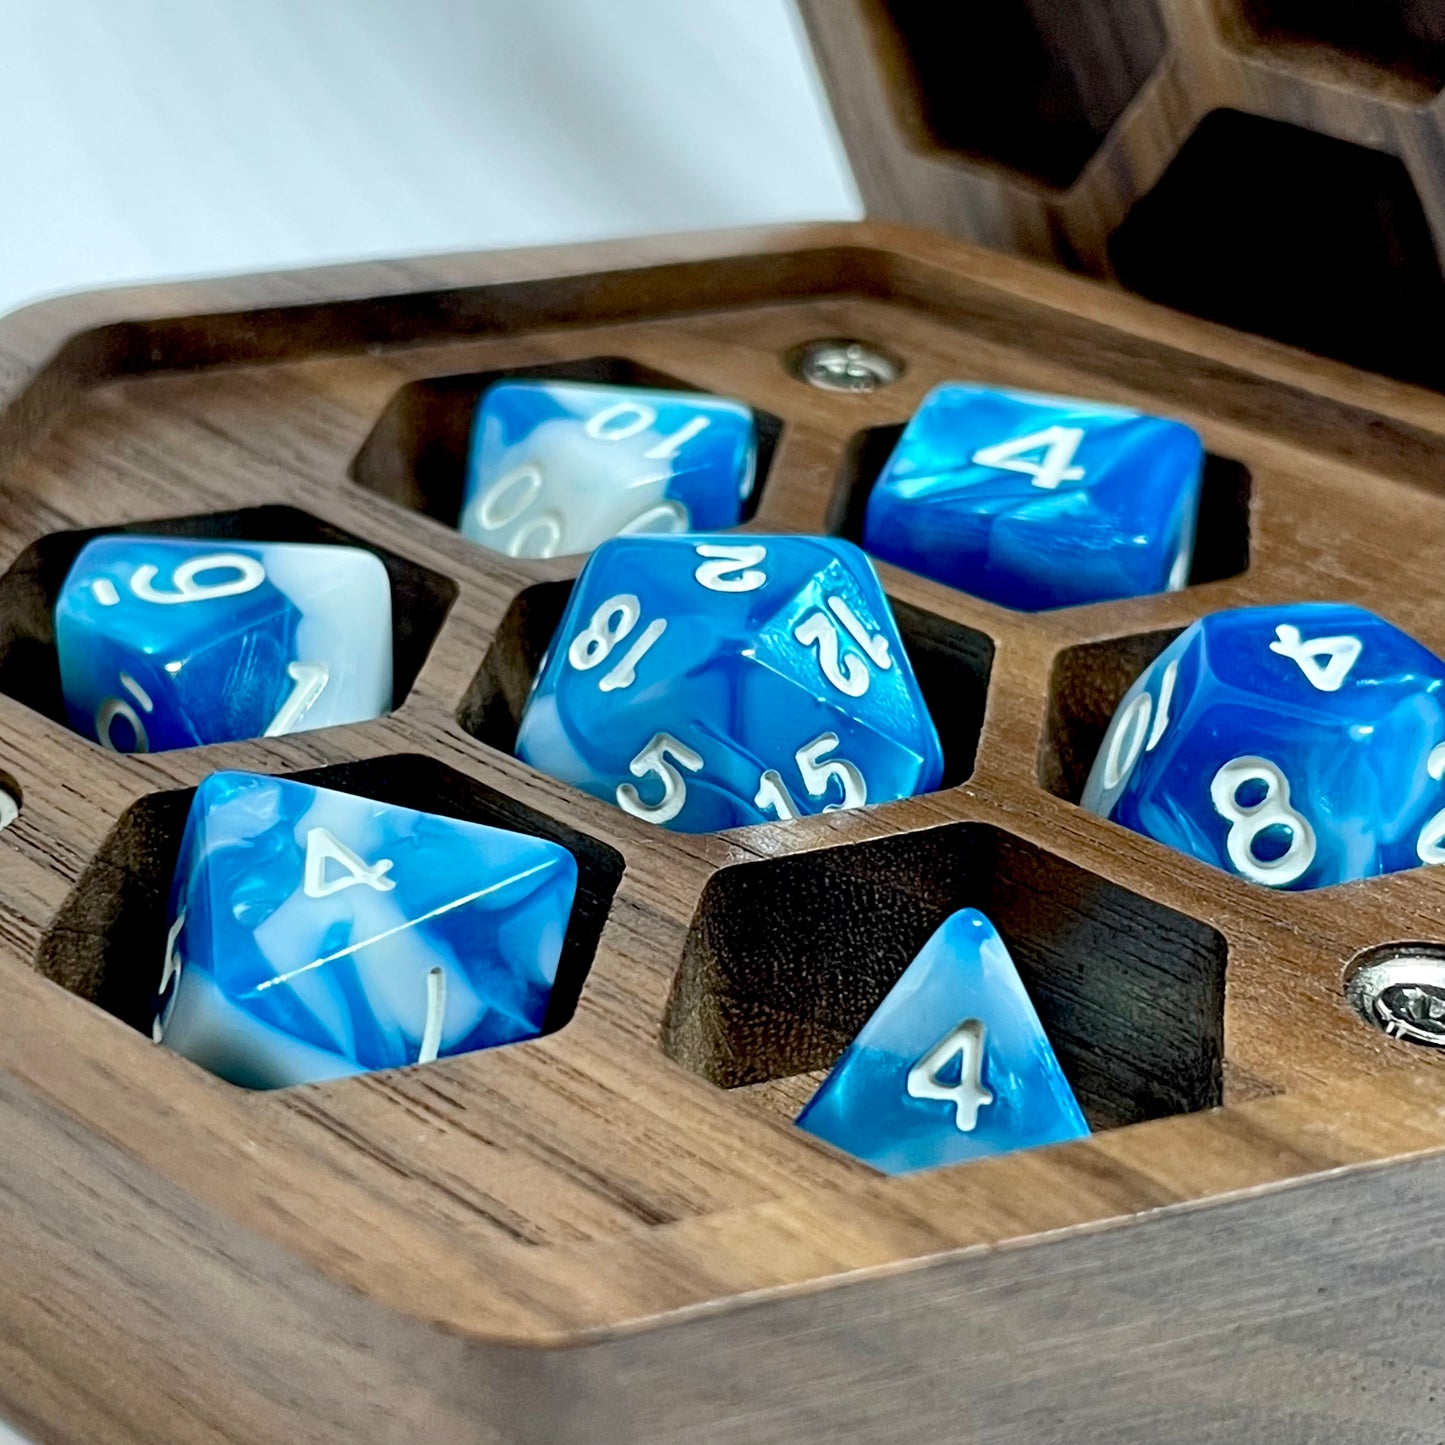 Wooden maple dnd skull dice case open close up with blue dice inside